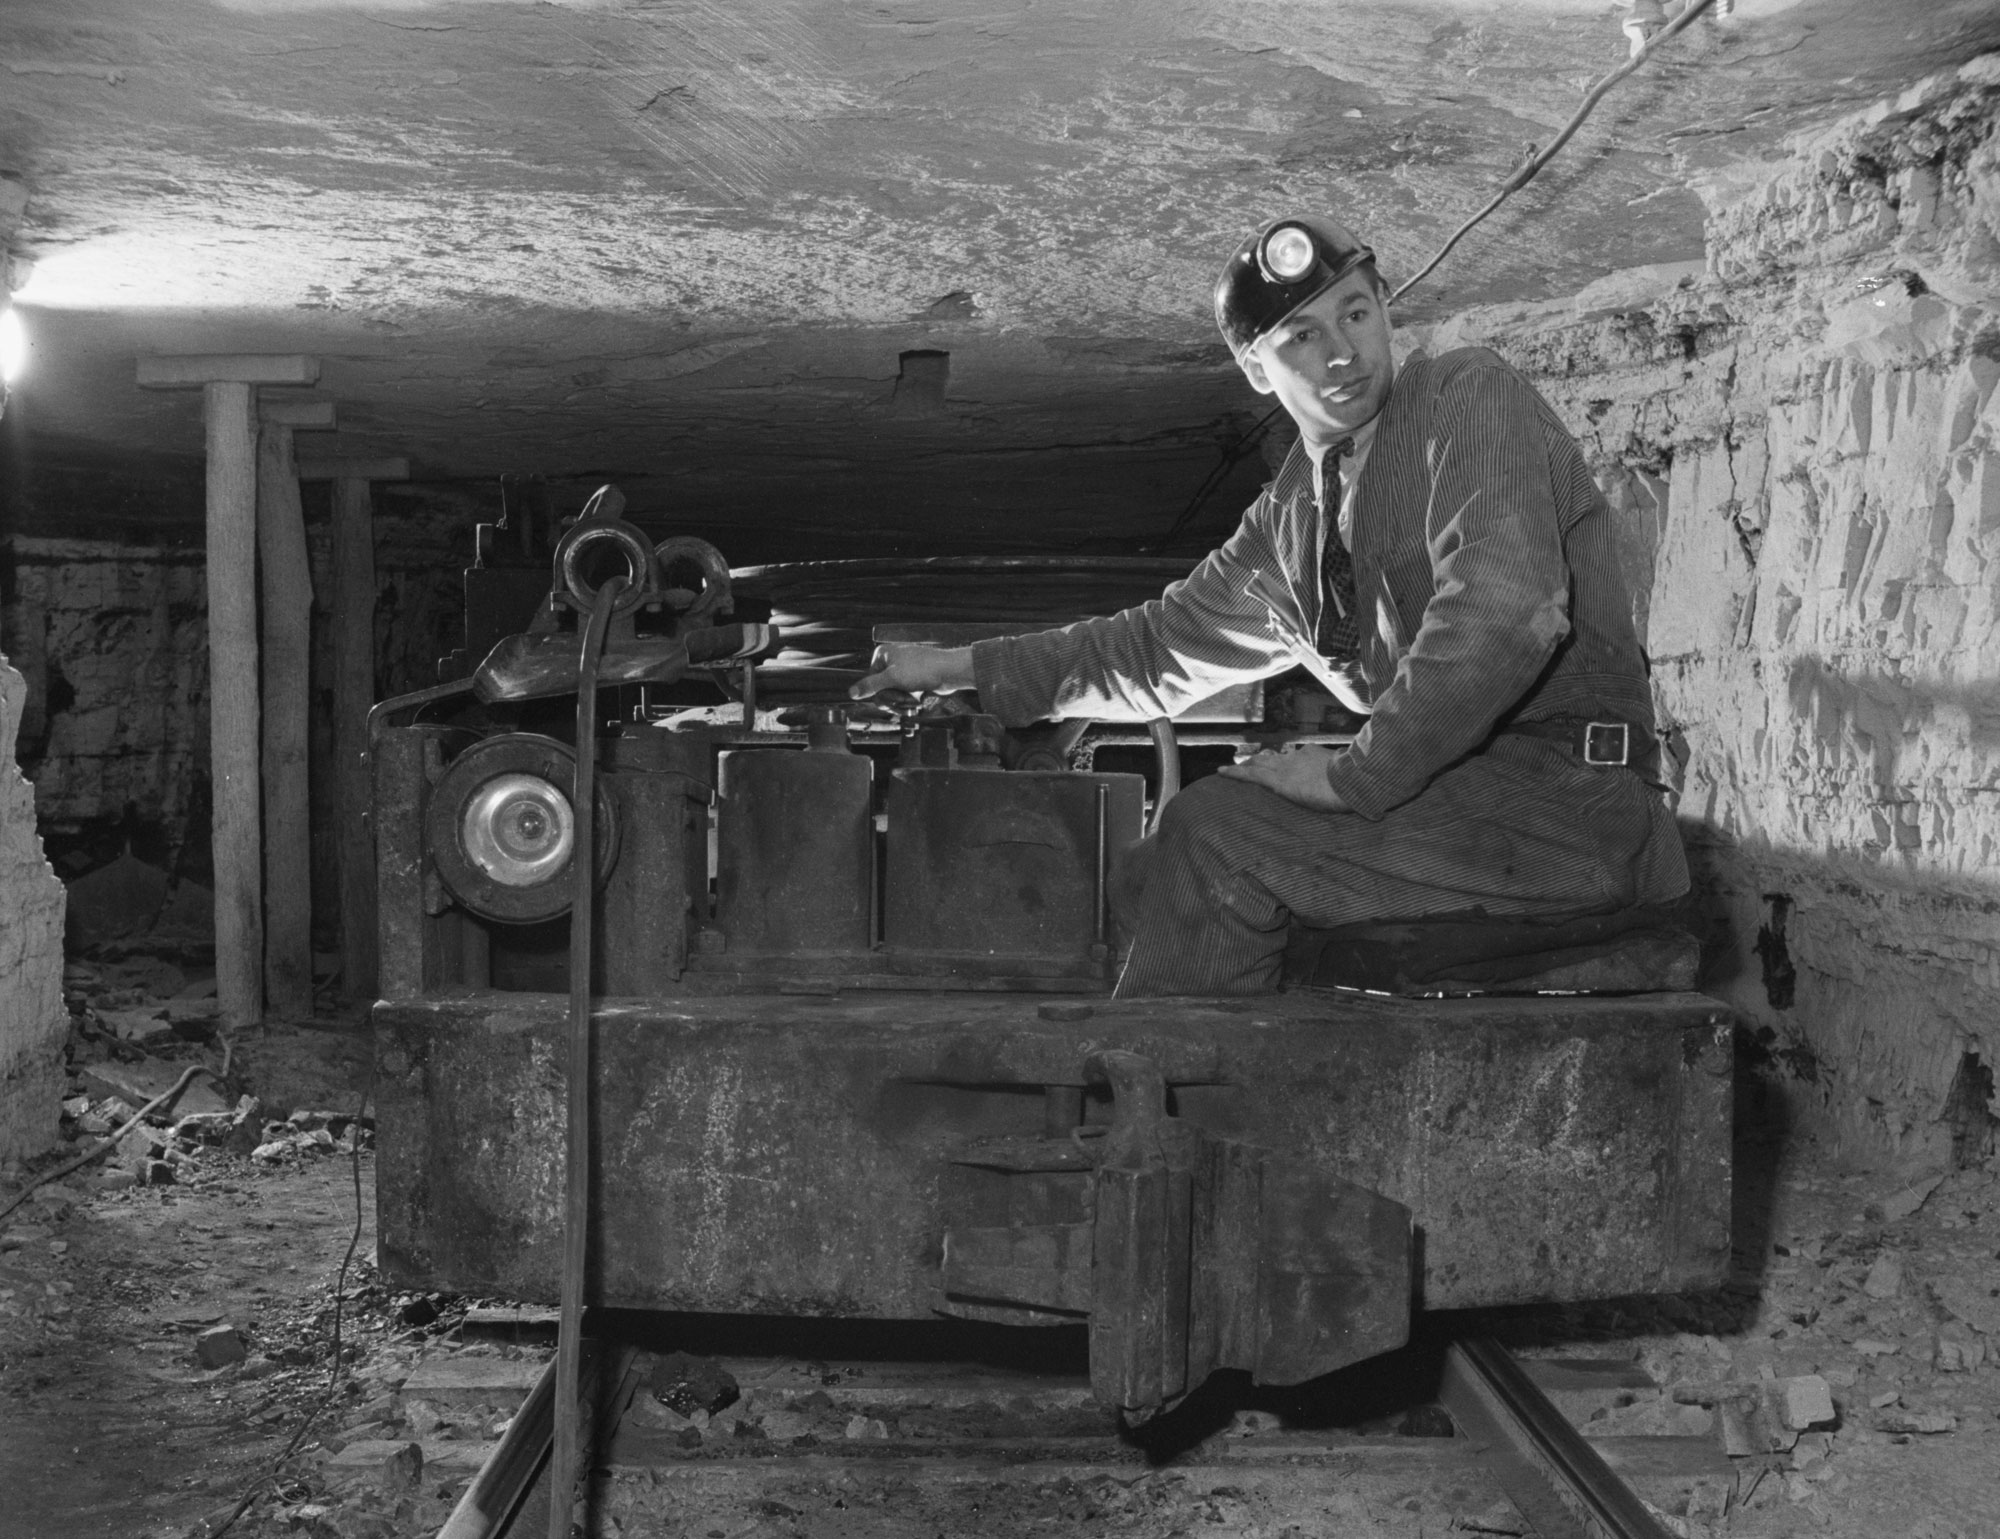 Black and white photograph of a man operating a mine car, 1942. The photo shows a man in coveralls over a shirt and tie, with a hard hat that has a lamp on the front. The man is seated on the right side of a mien car, a low car that runs on rails. The man and car are in a mien shaft with a low ceiling. In the left background, three supports can be seen holding up the ceiling.